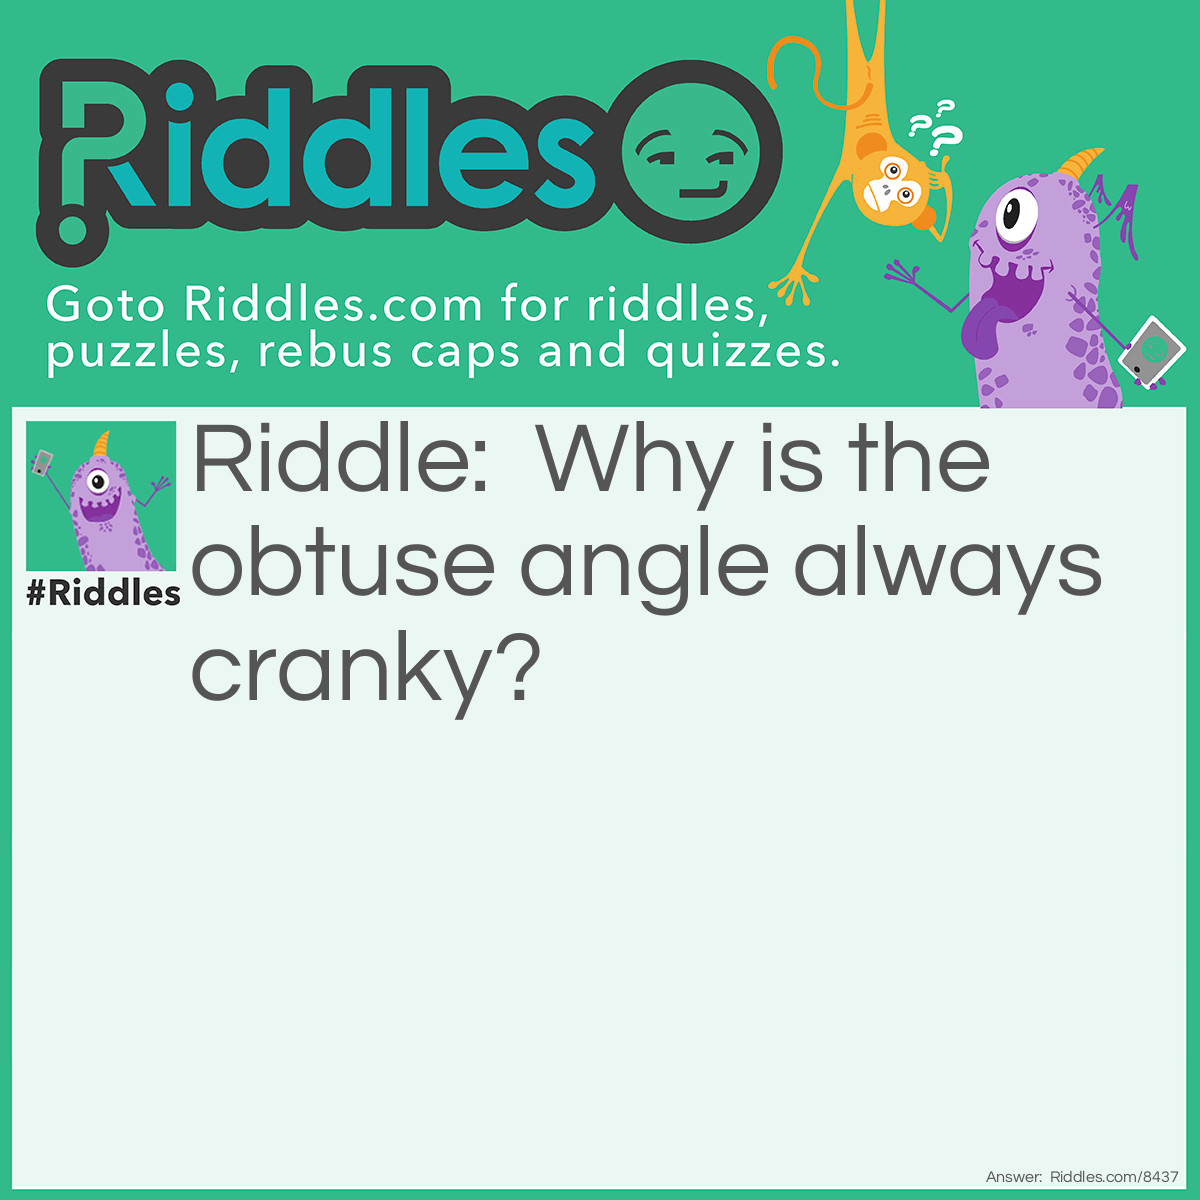 Riddle: Why is the obtuse angle always cranky? Answer: Because it is never right!